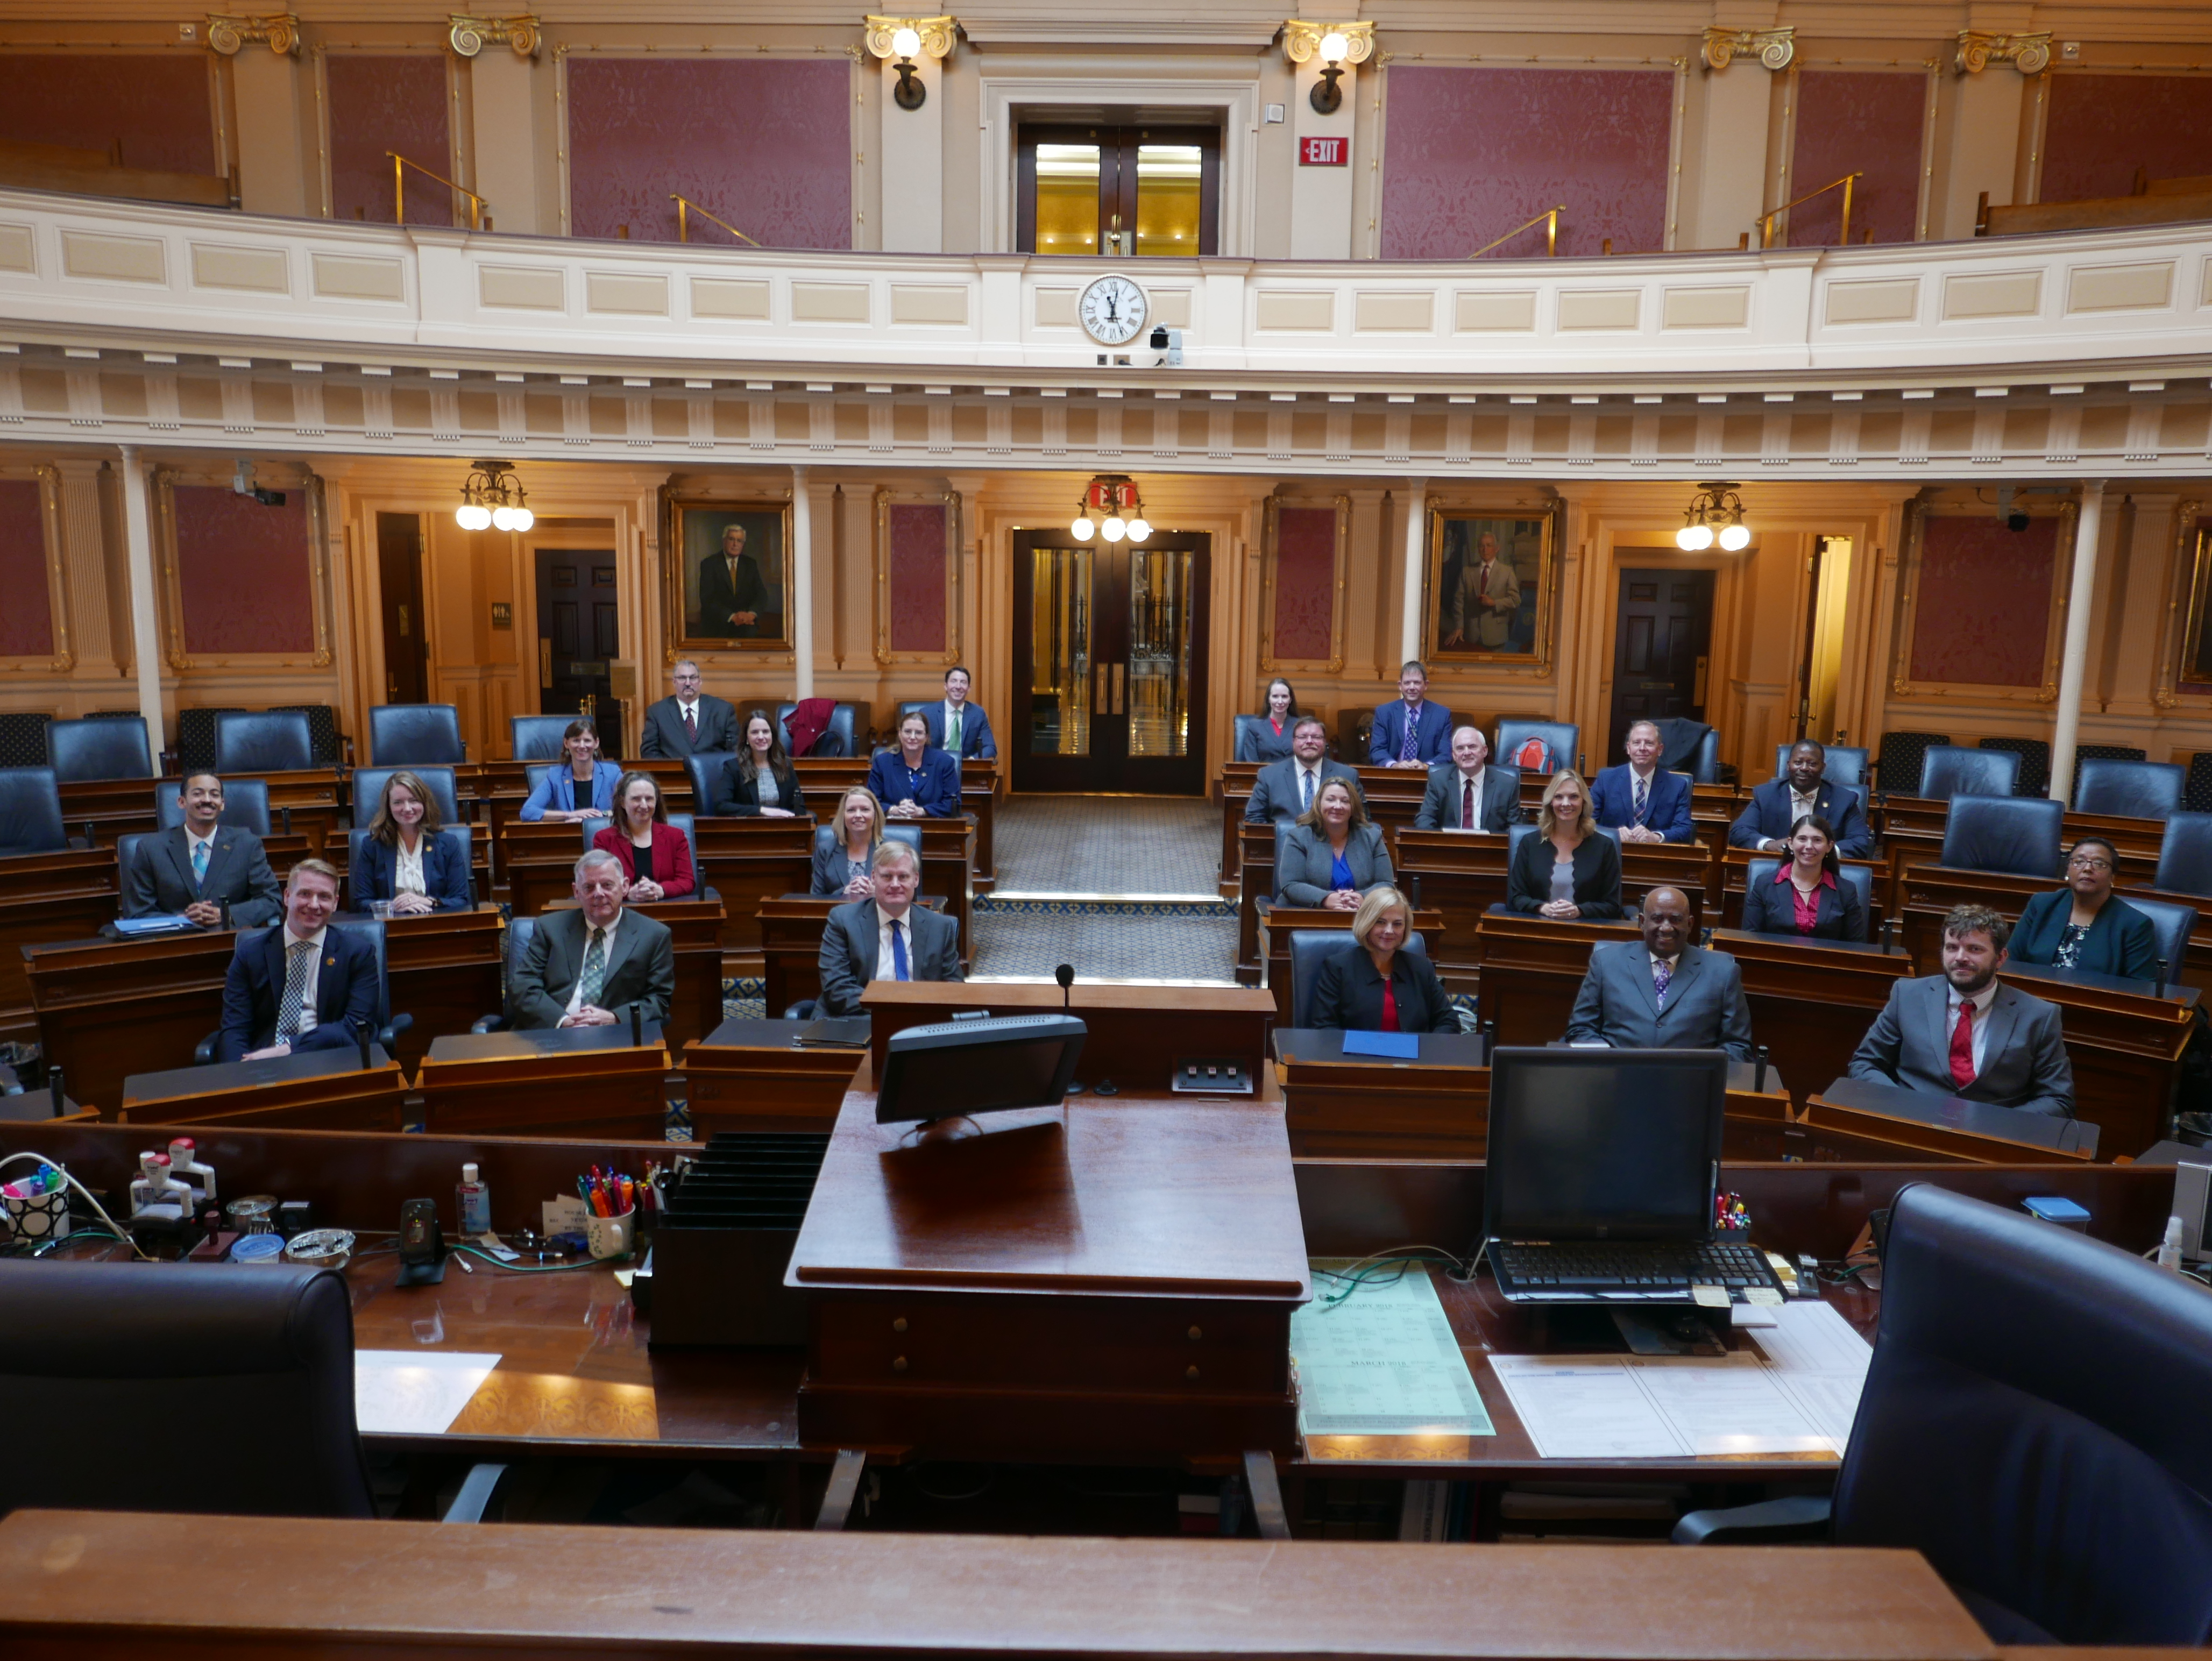 The Fall 2018 Graduating class of Virginia Executive Institute culminating their graduation ceremony at the state Capitol. 